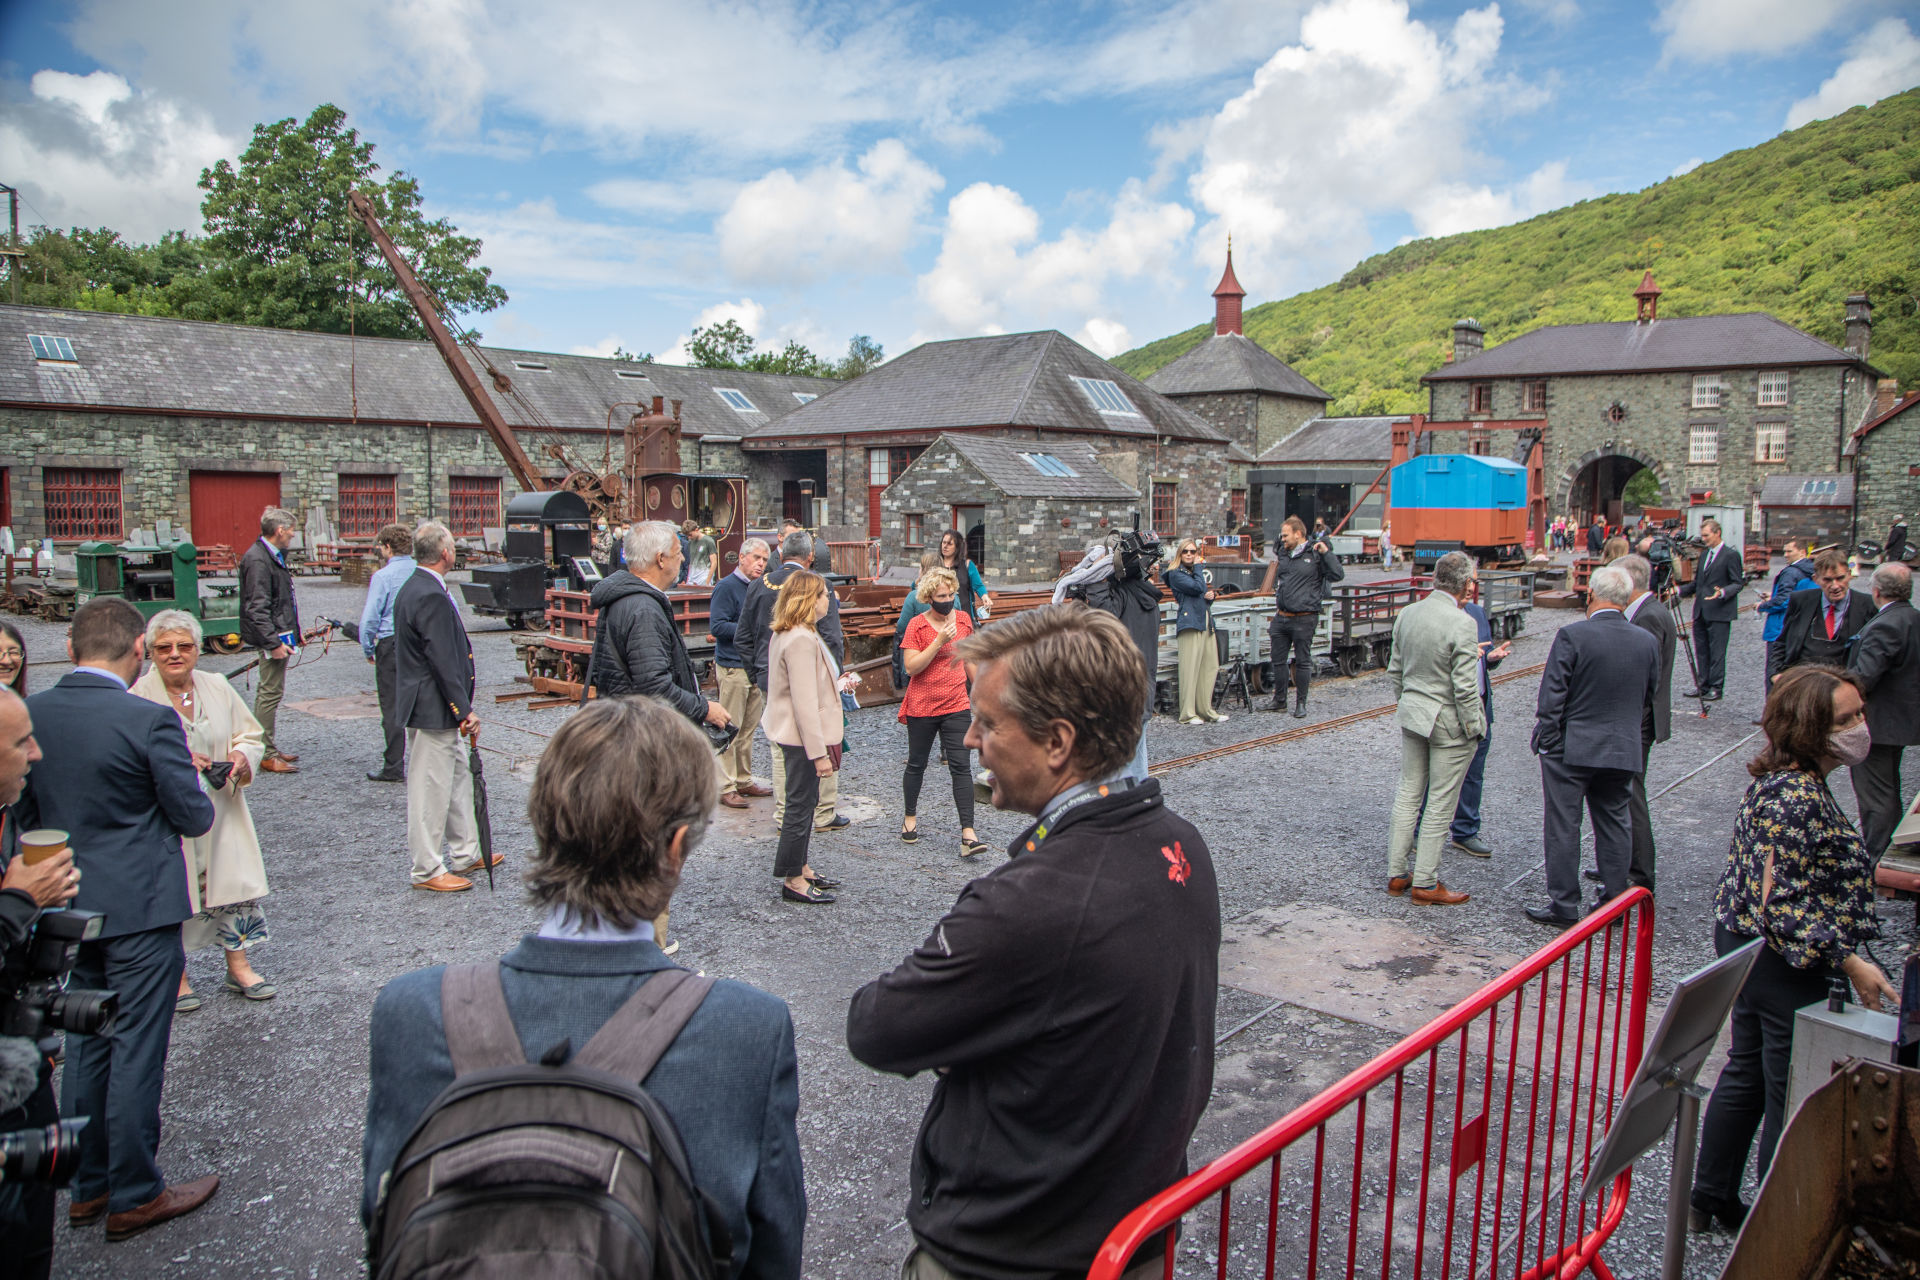 The press and members of the Wales Slate Steering Group and Partners gathered at the National Slate Museum, Llanberis awaiting the announcement.